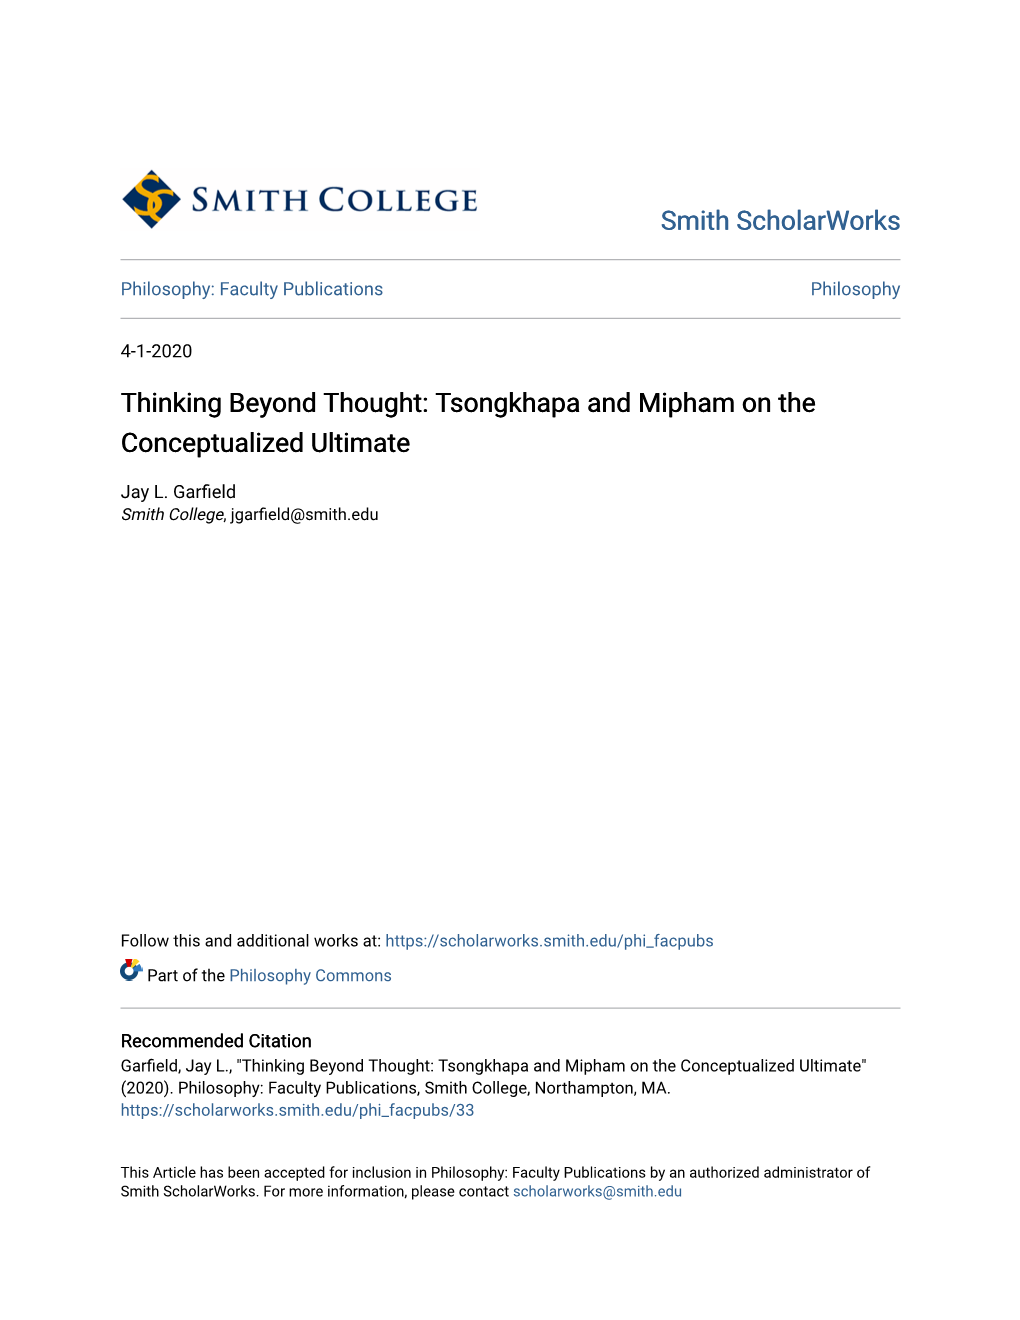 Thinking Beyond Thought: Tsongkhapa and Mipham on the Conceptualized Ultimate